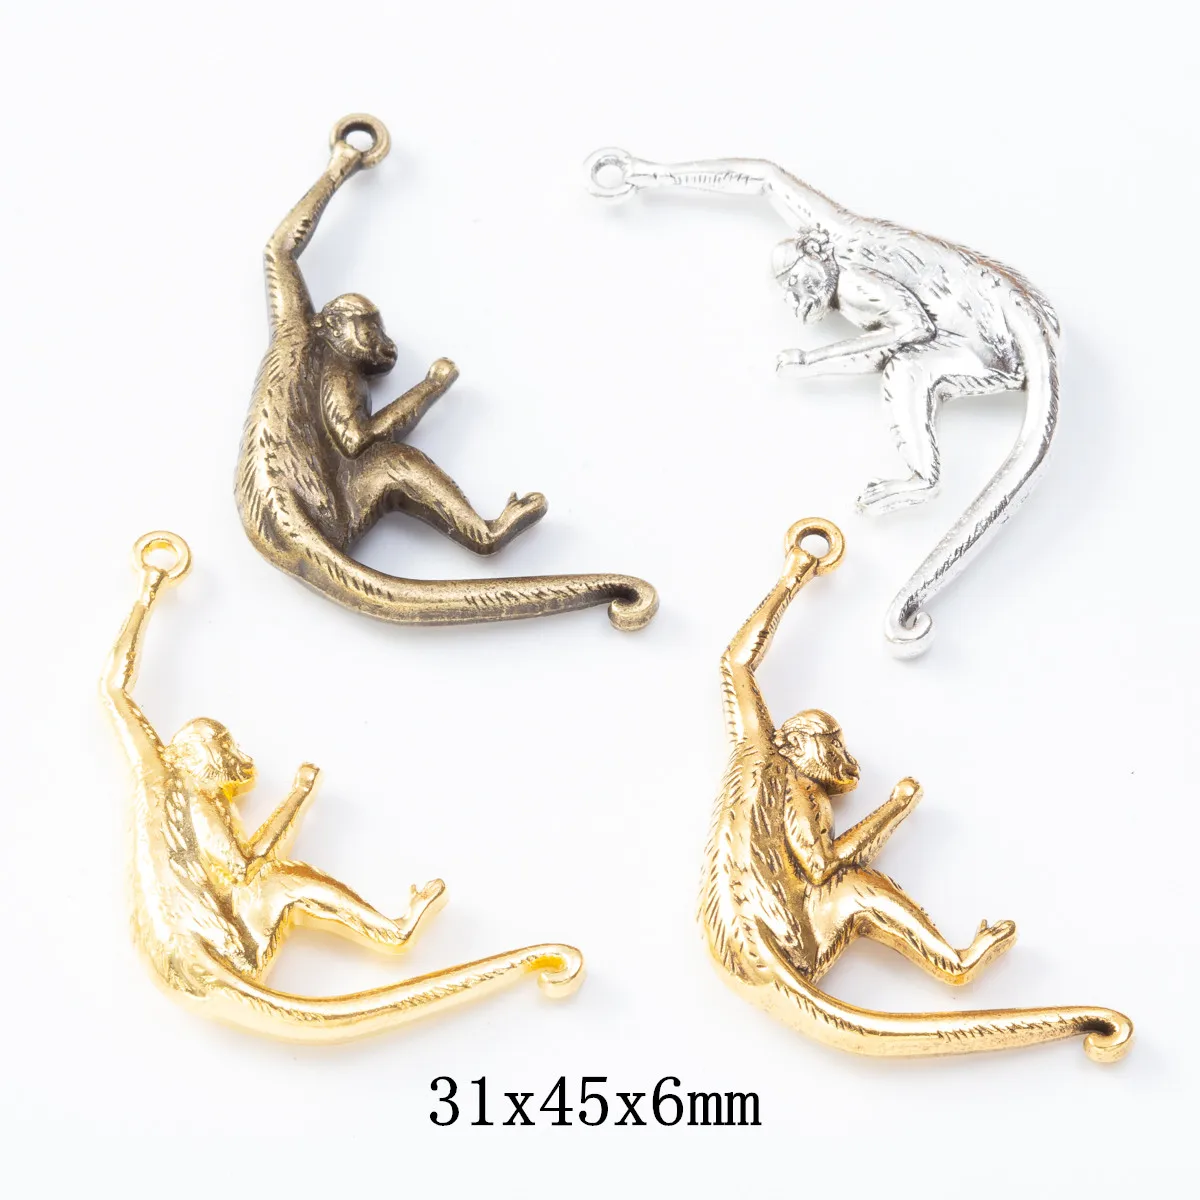 

10pcs monkey Craft Supplies Charms Pendants for DIY Crafting Jewelry Findings Making Accessory 665